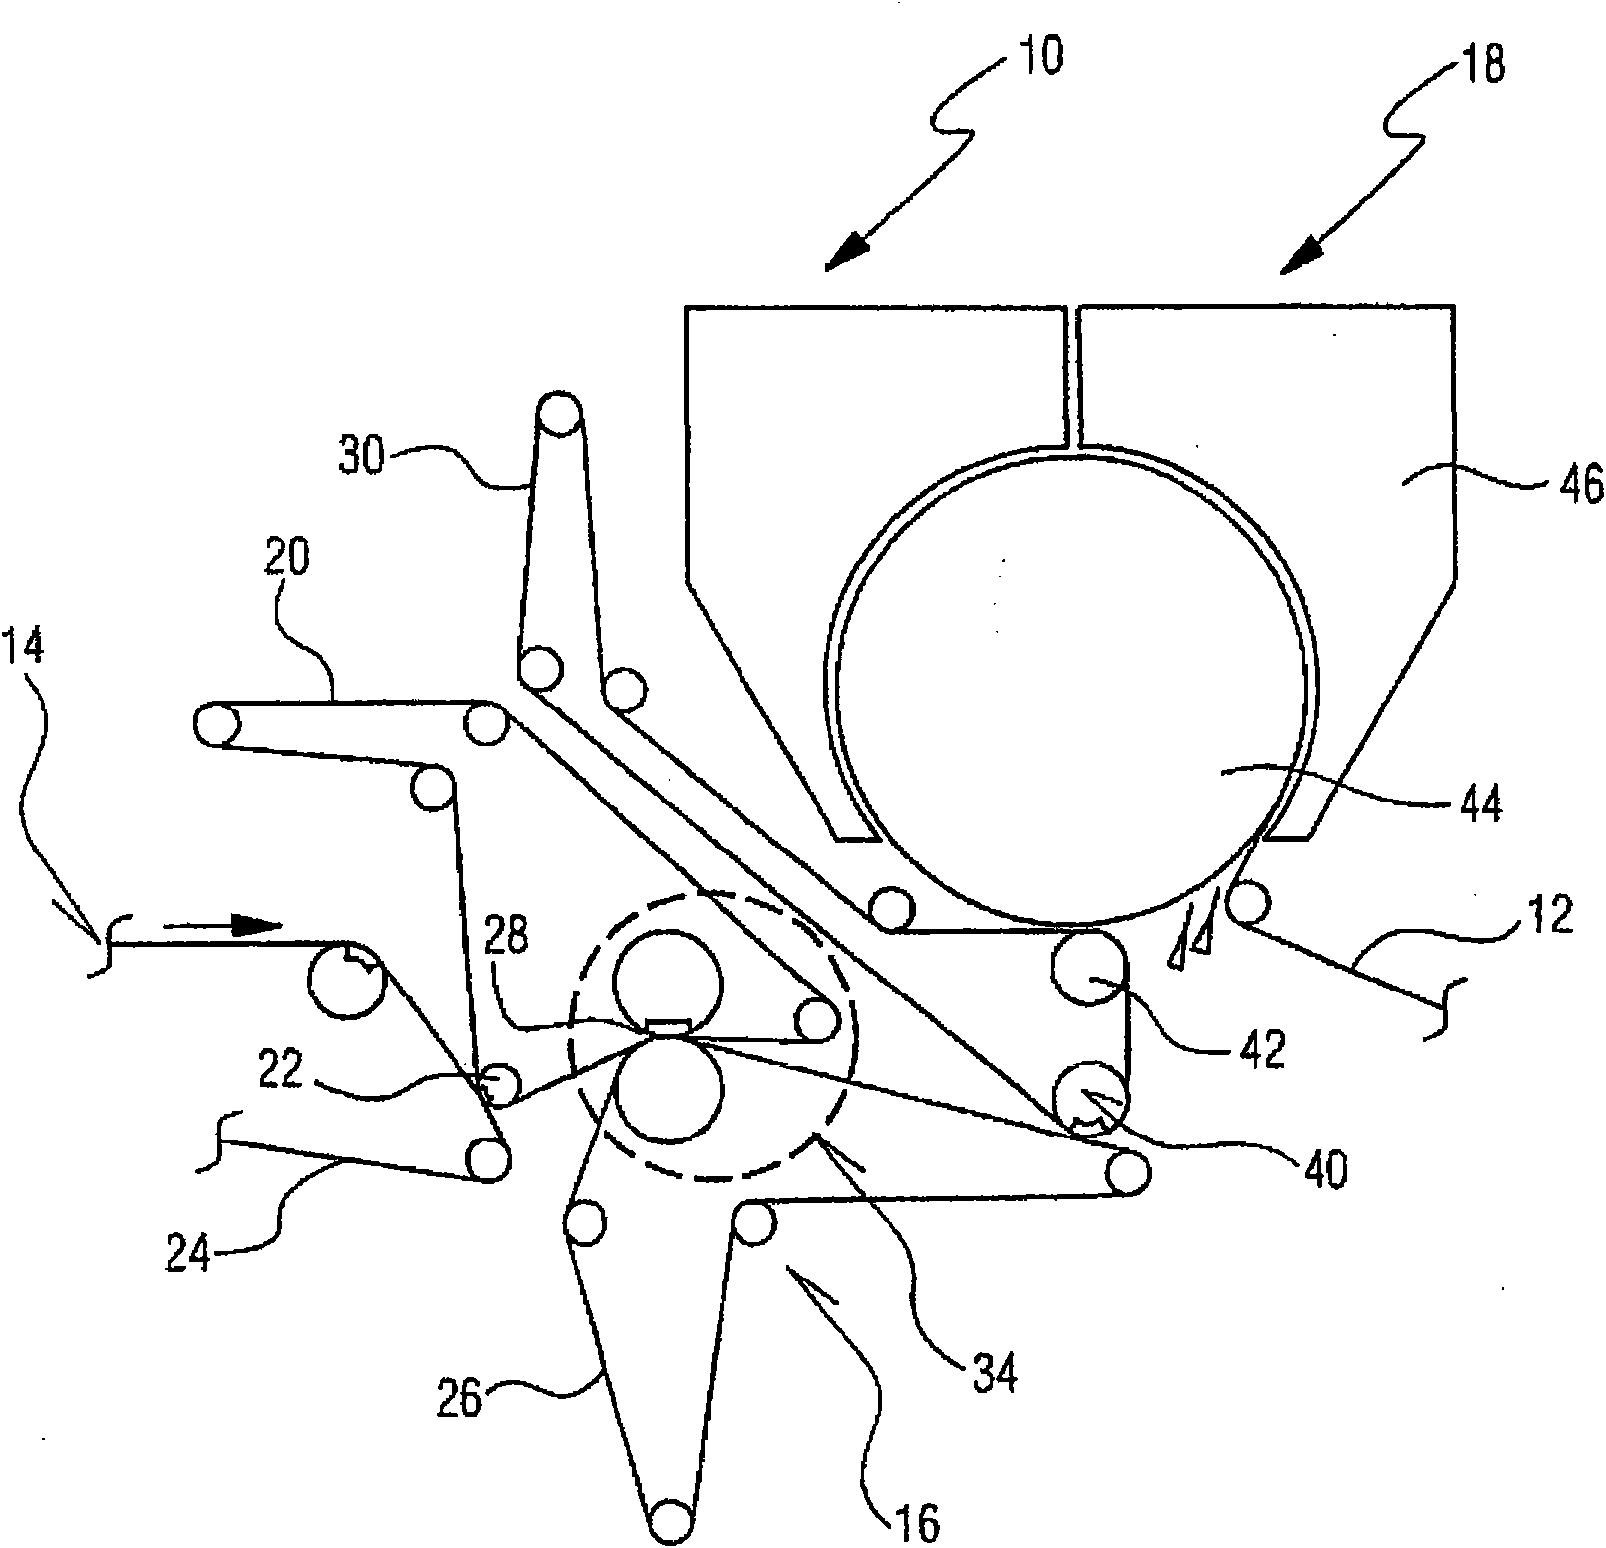 Method and machine for producing a paper web that is smooth on one side